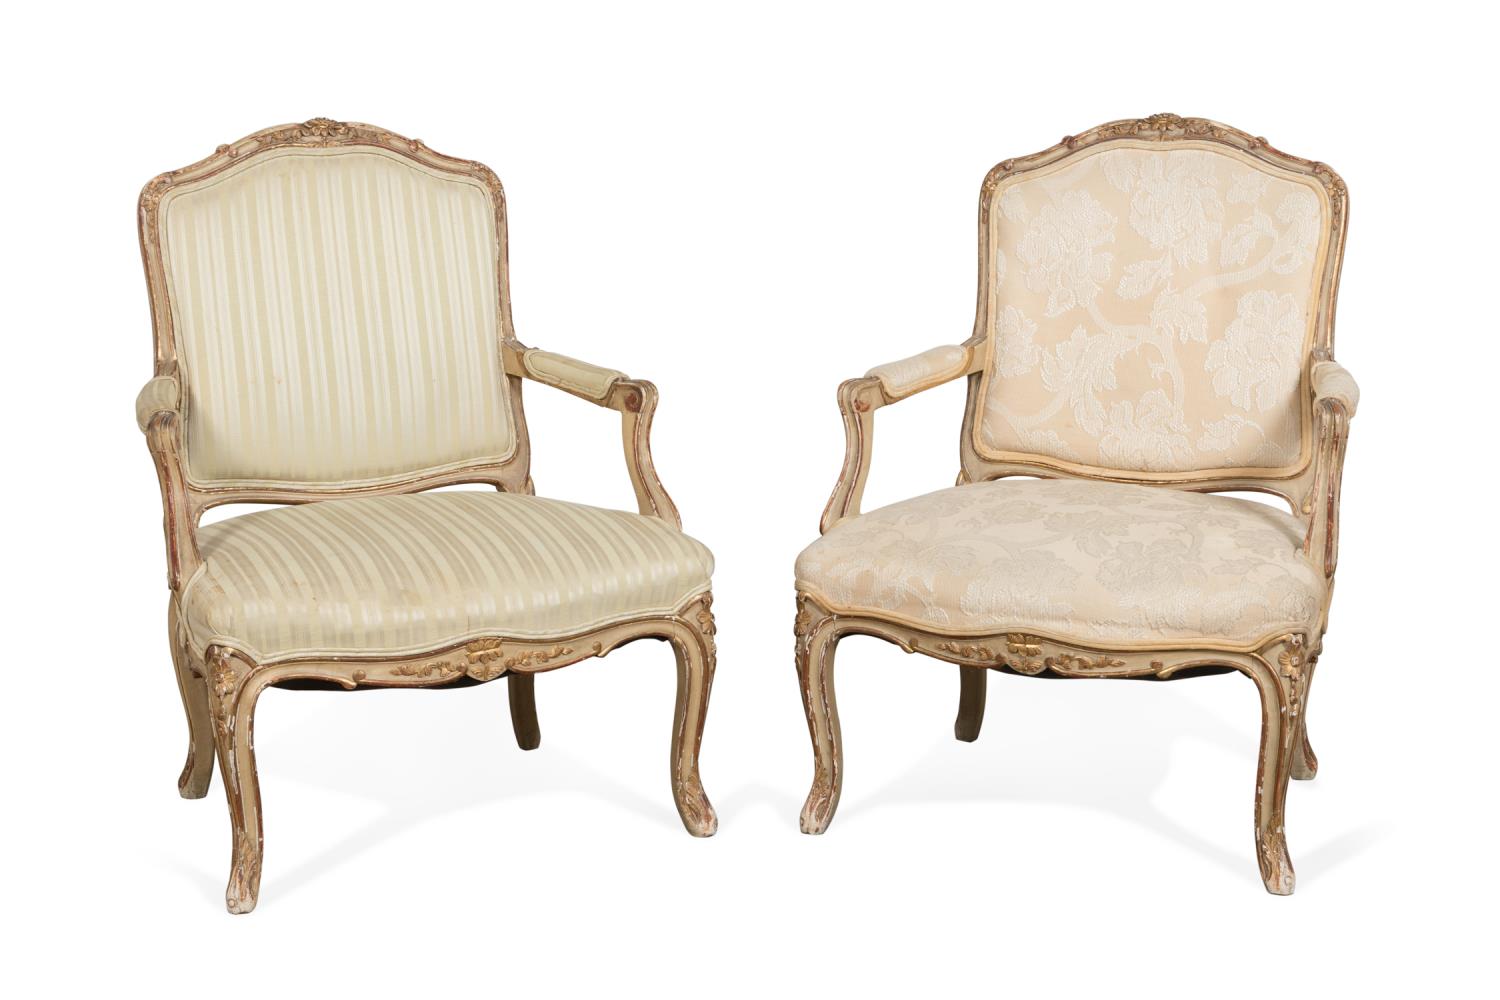 PAIR LOUIS XV STYLE PAINTED FAUTEUILS